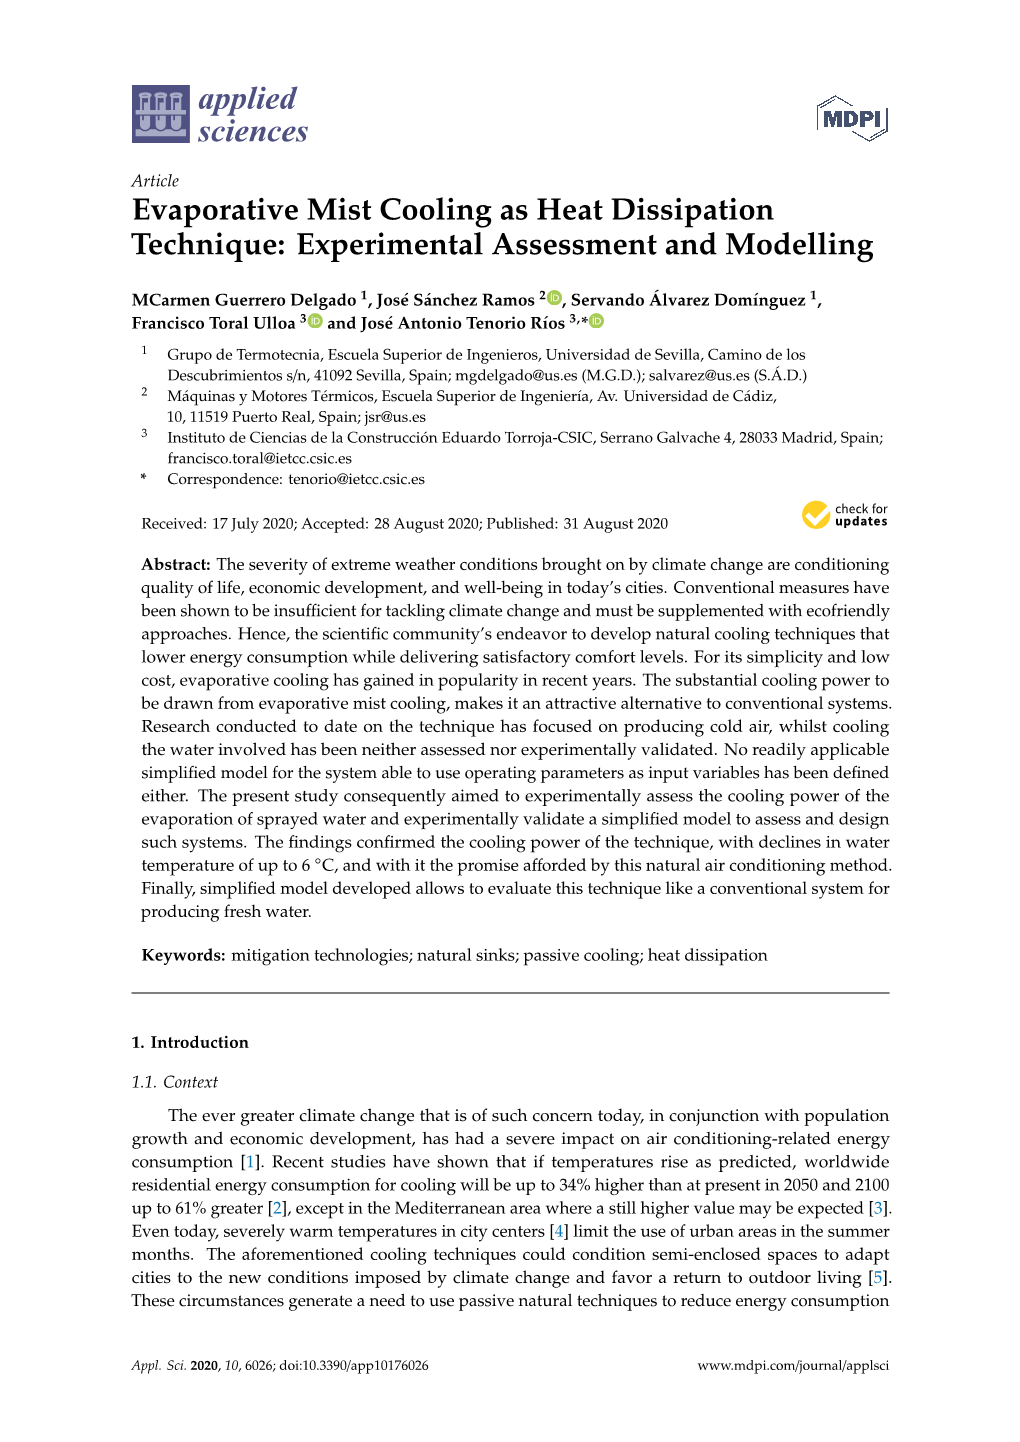 Evaporative Mist Cooling As Heat Dissipation Technique: Experimental Assessment and Modelling